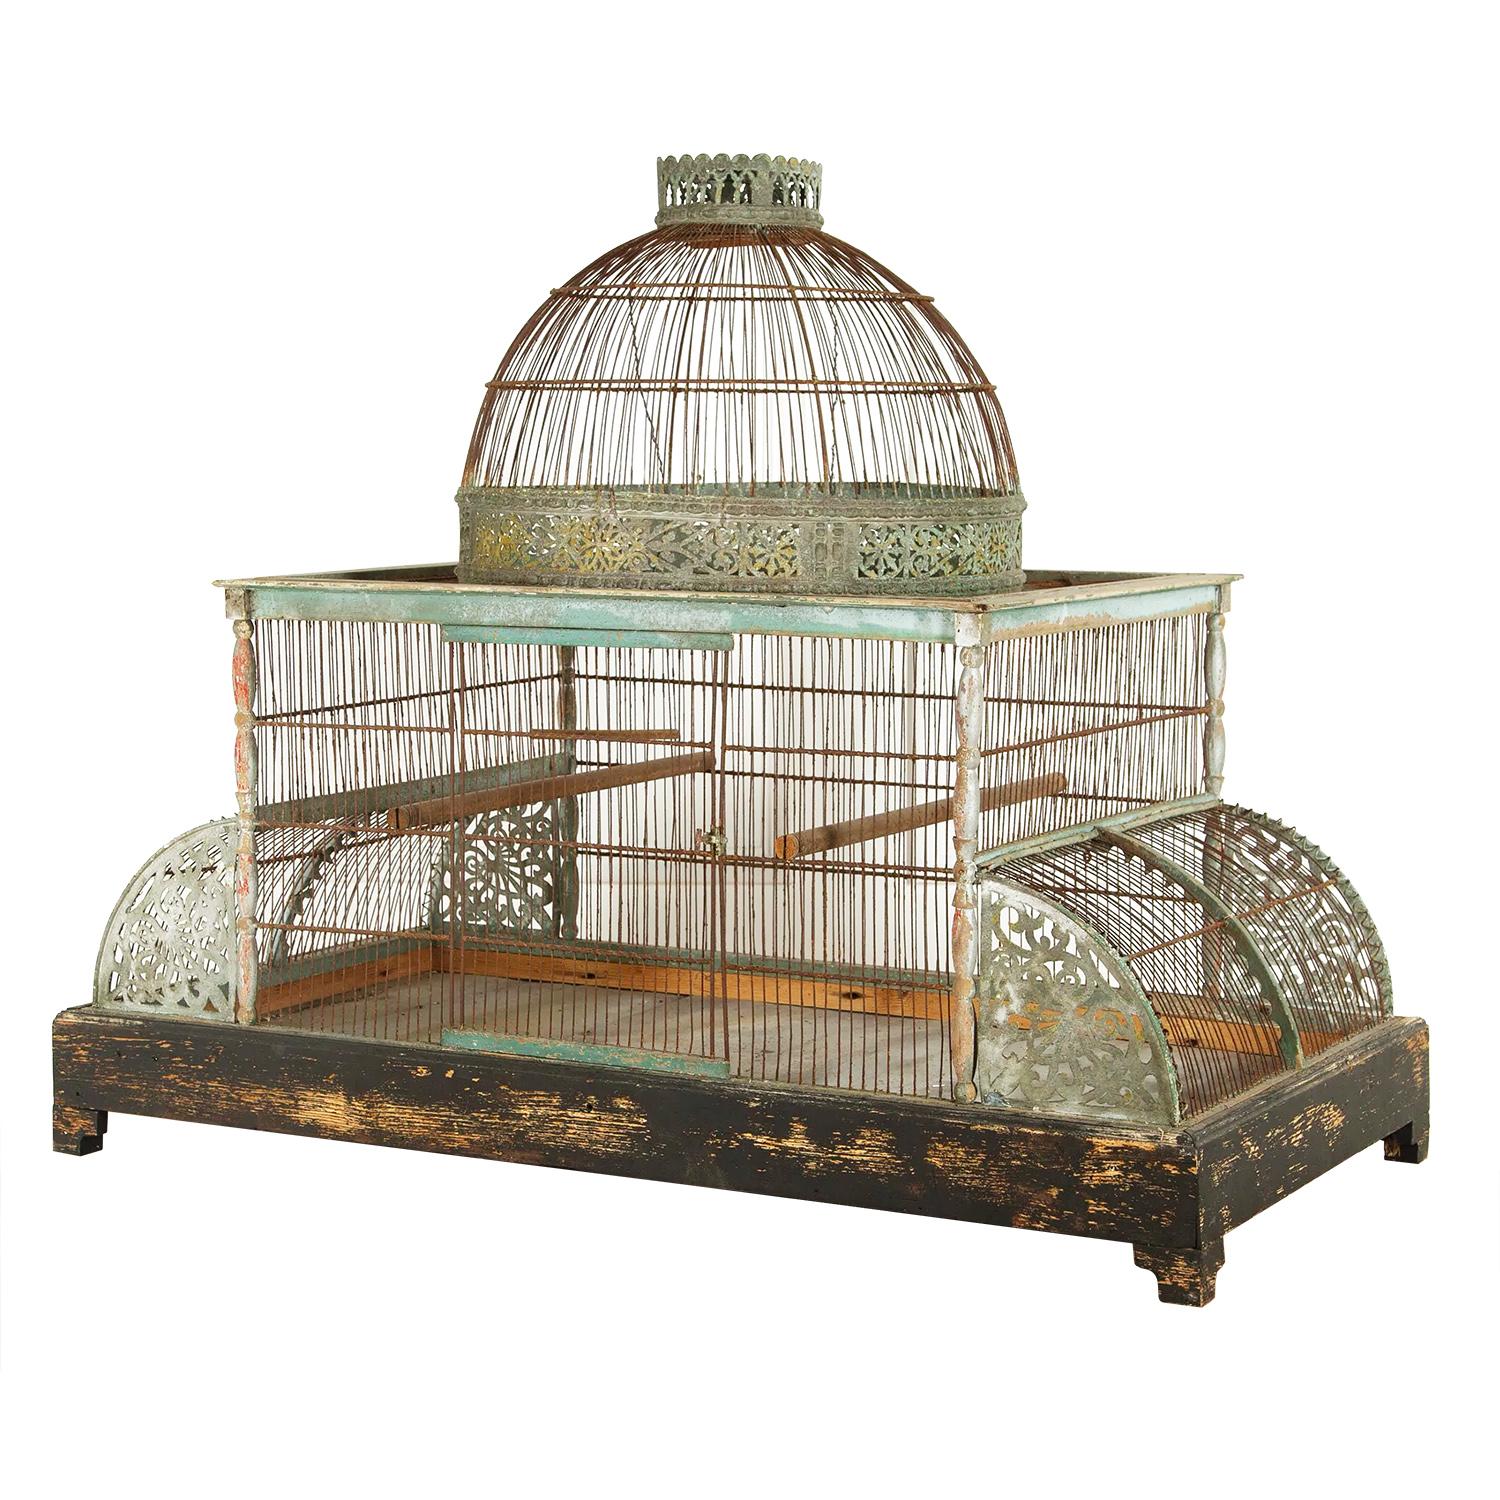 Large 19th century bird cage with a wooden base with zinc liner. This piece features curved sides made of pierced metal and hand forged wires with a decorative architectural domed top feature.
 